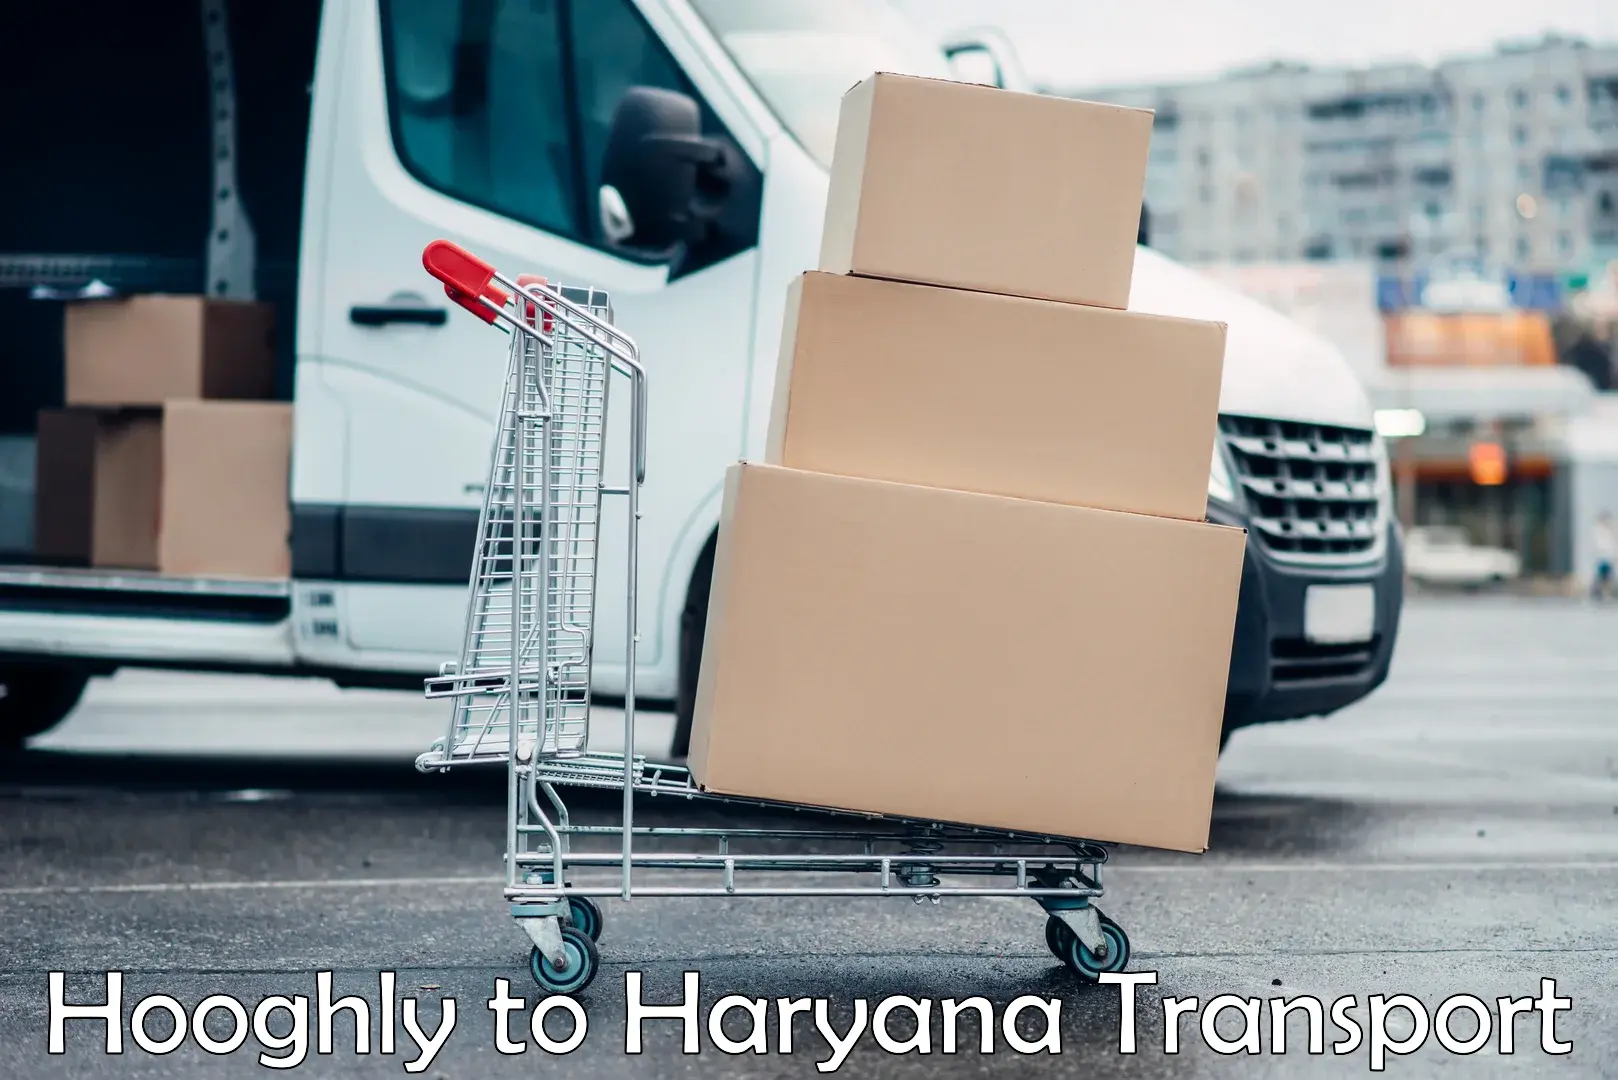 Interstate goods transport Hooghly to NCR Haryana